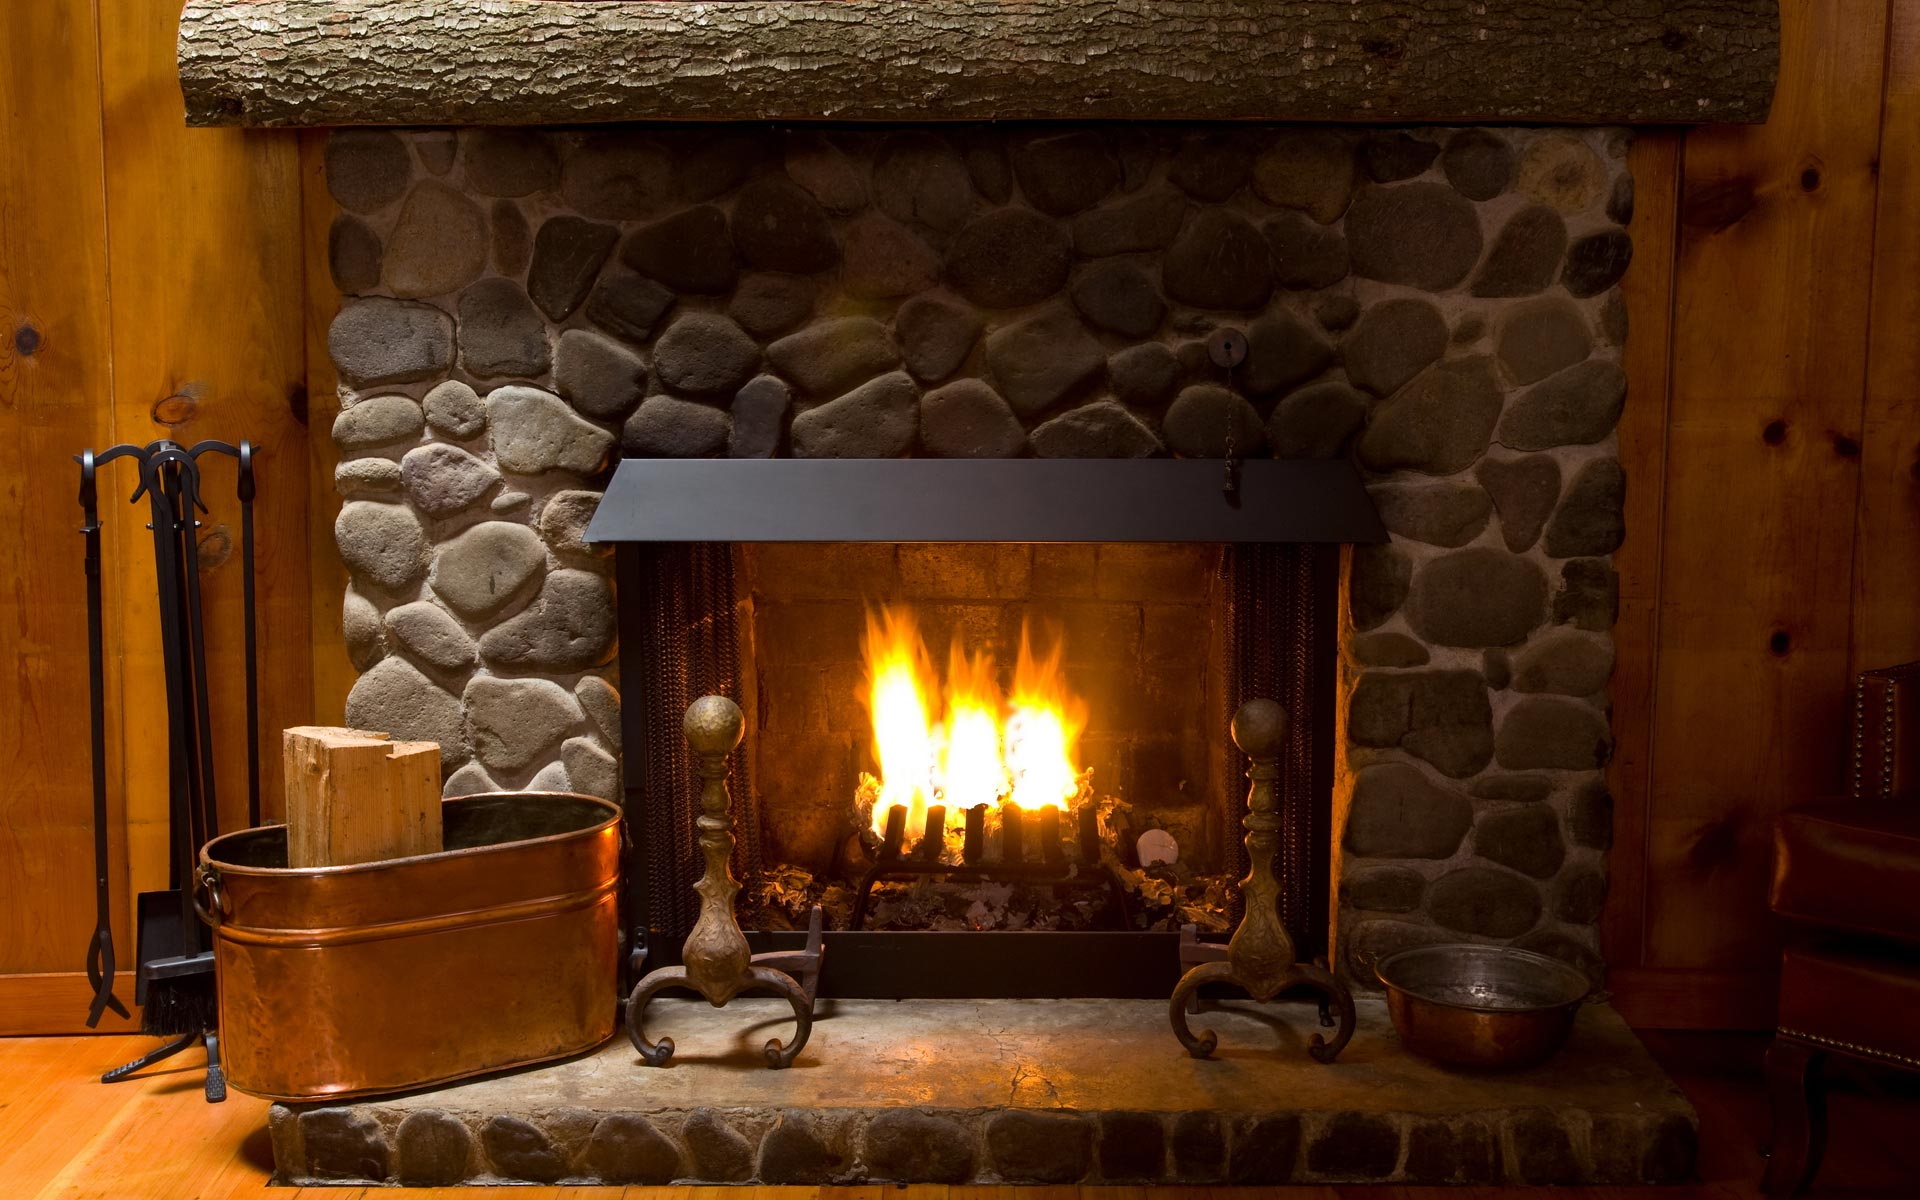 How to get your North Lake Tahoe Fireplace Ready for Winter